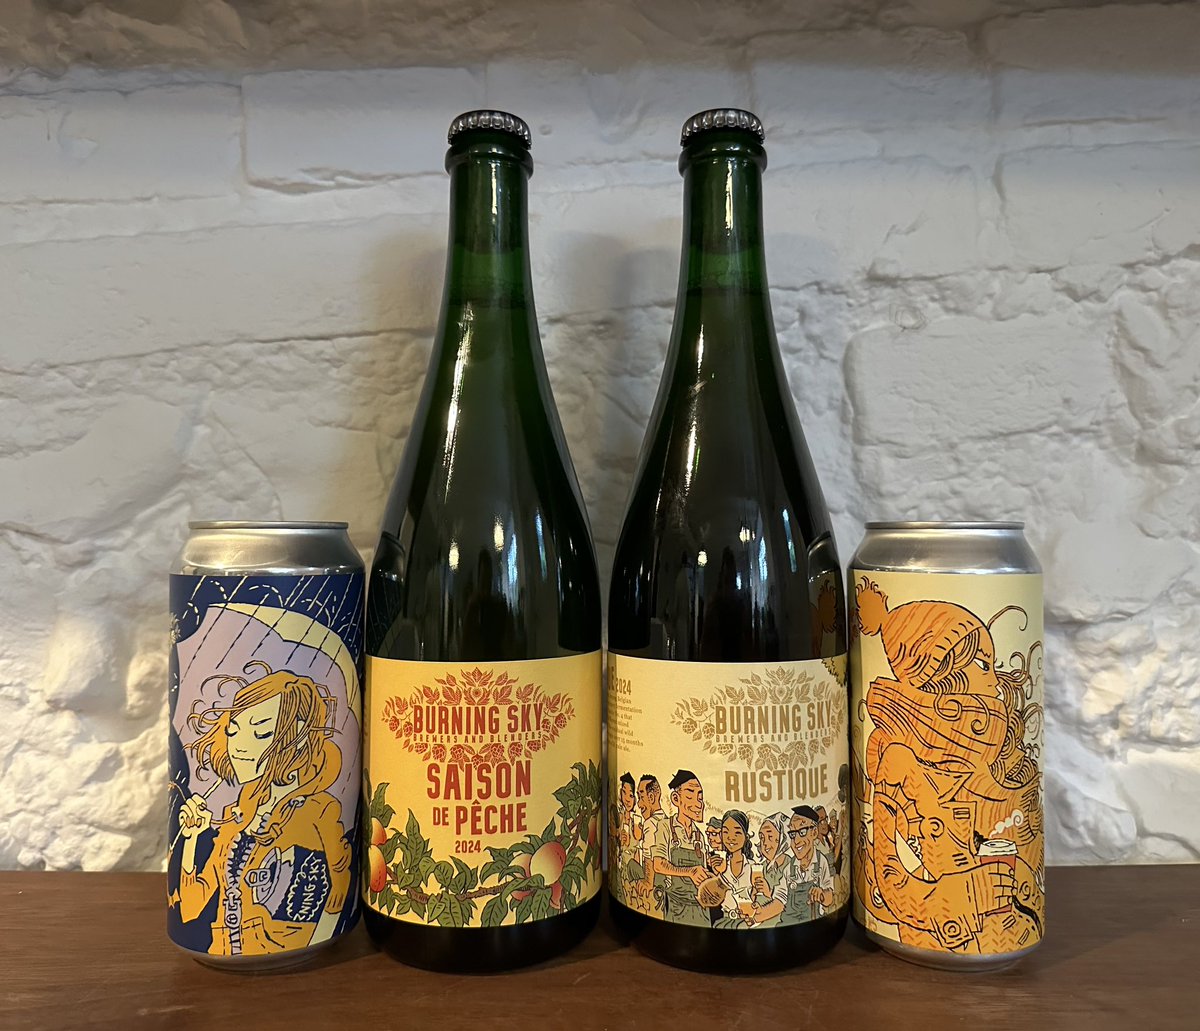 Big stock drop on the webshop now and heading to trade next week👍 In can, 2 collab IPA’s: IT POURS w/ @trackbrewco WARMTH w/ @TheBeakBrewery Funky bottles: SAISON DE PÊCHE 🍑 🍑🍑 RUSTIQUE proper wild ale All tasting 💯 in our minds 🥰🍺🥰